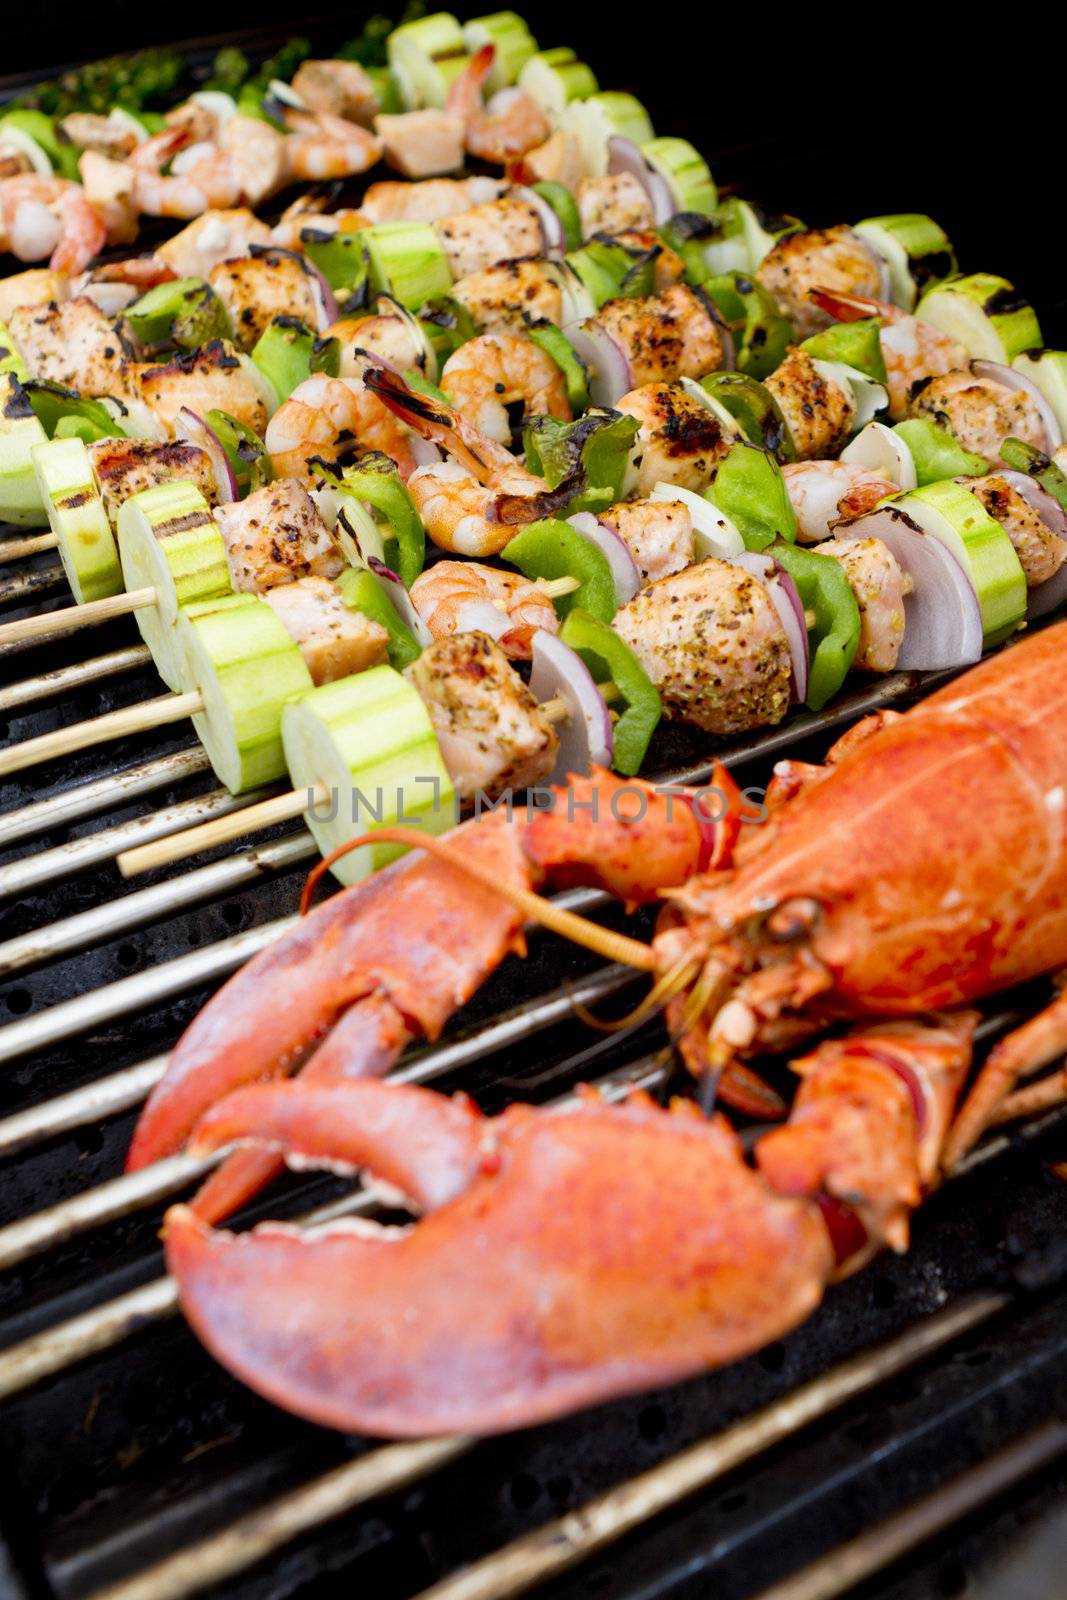 Salmon Skewers and Lobster are on the barbecue.